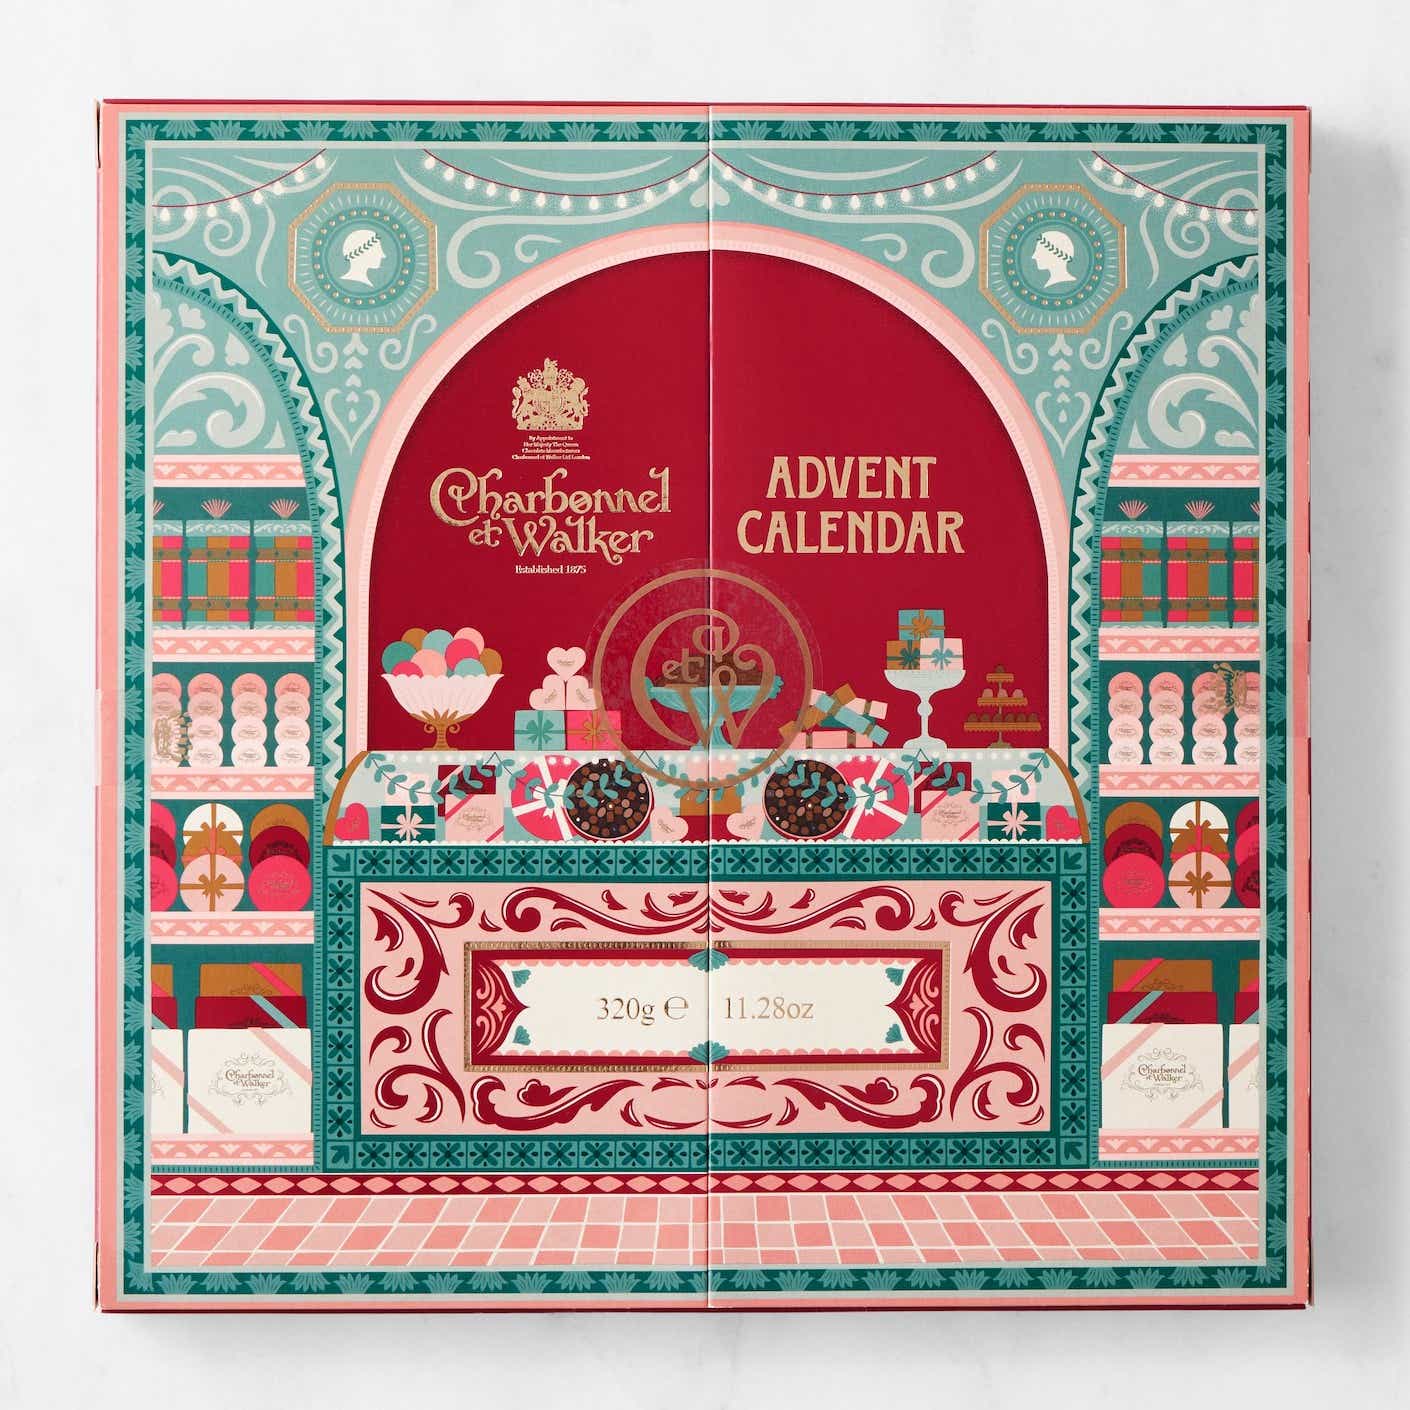 A closed advent calendar decorated to look like a display of Christmas goods